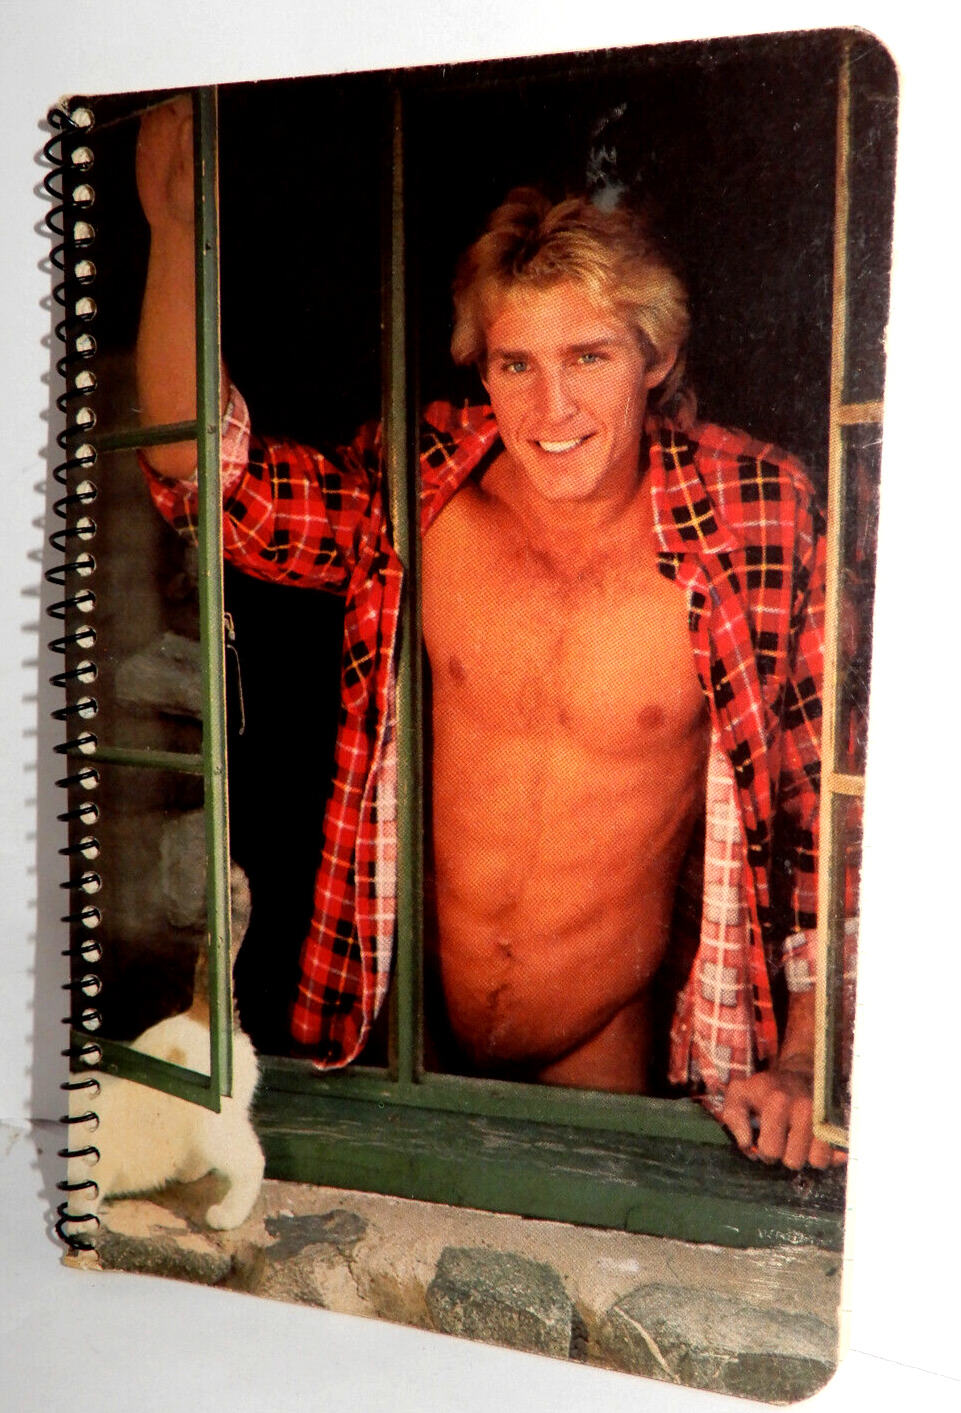 PLAYGIRL 1983 Sexy Man STATIONARY NOTE PAD Vintage SCANTILY CLAD GUY Collectible